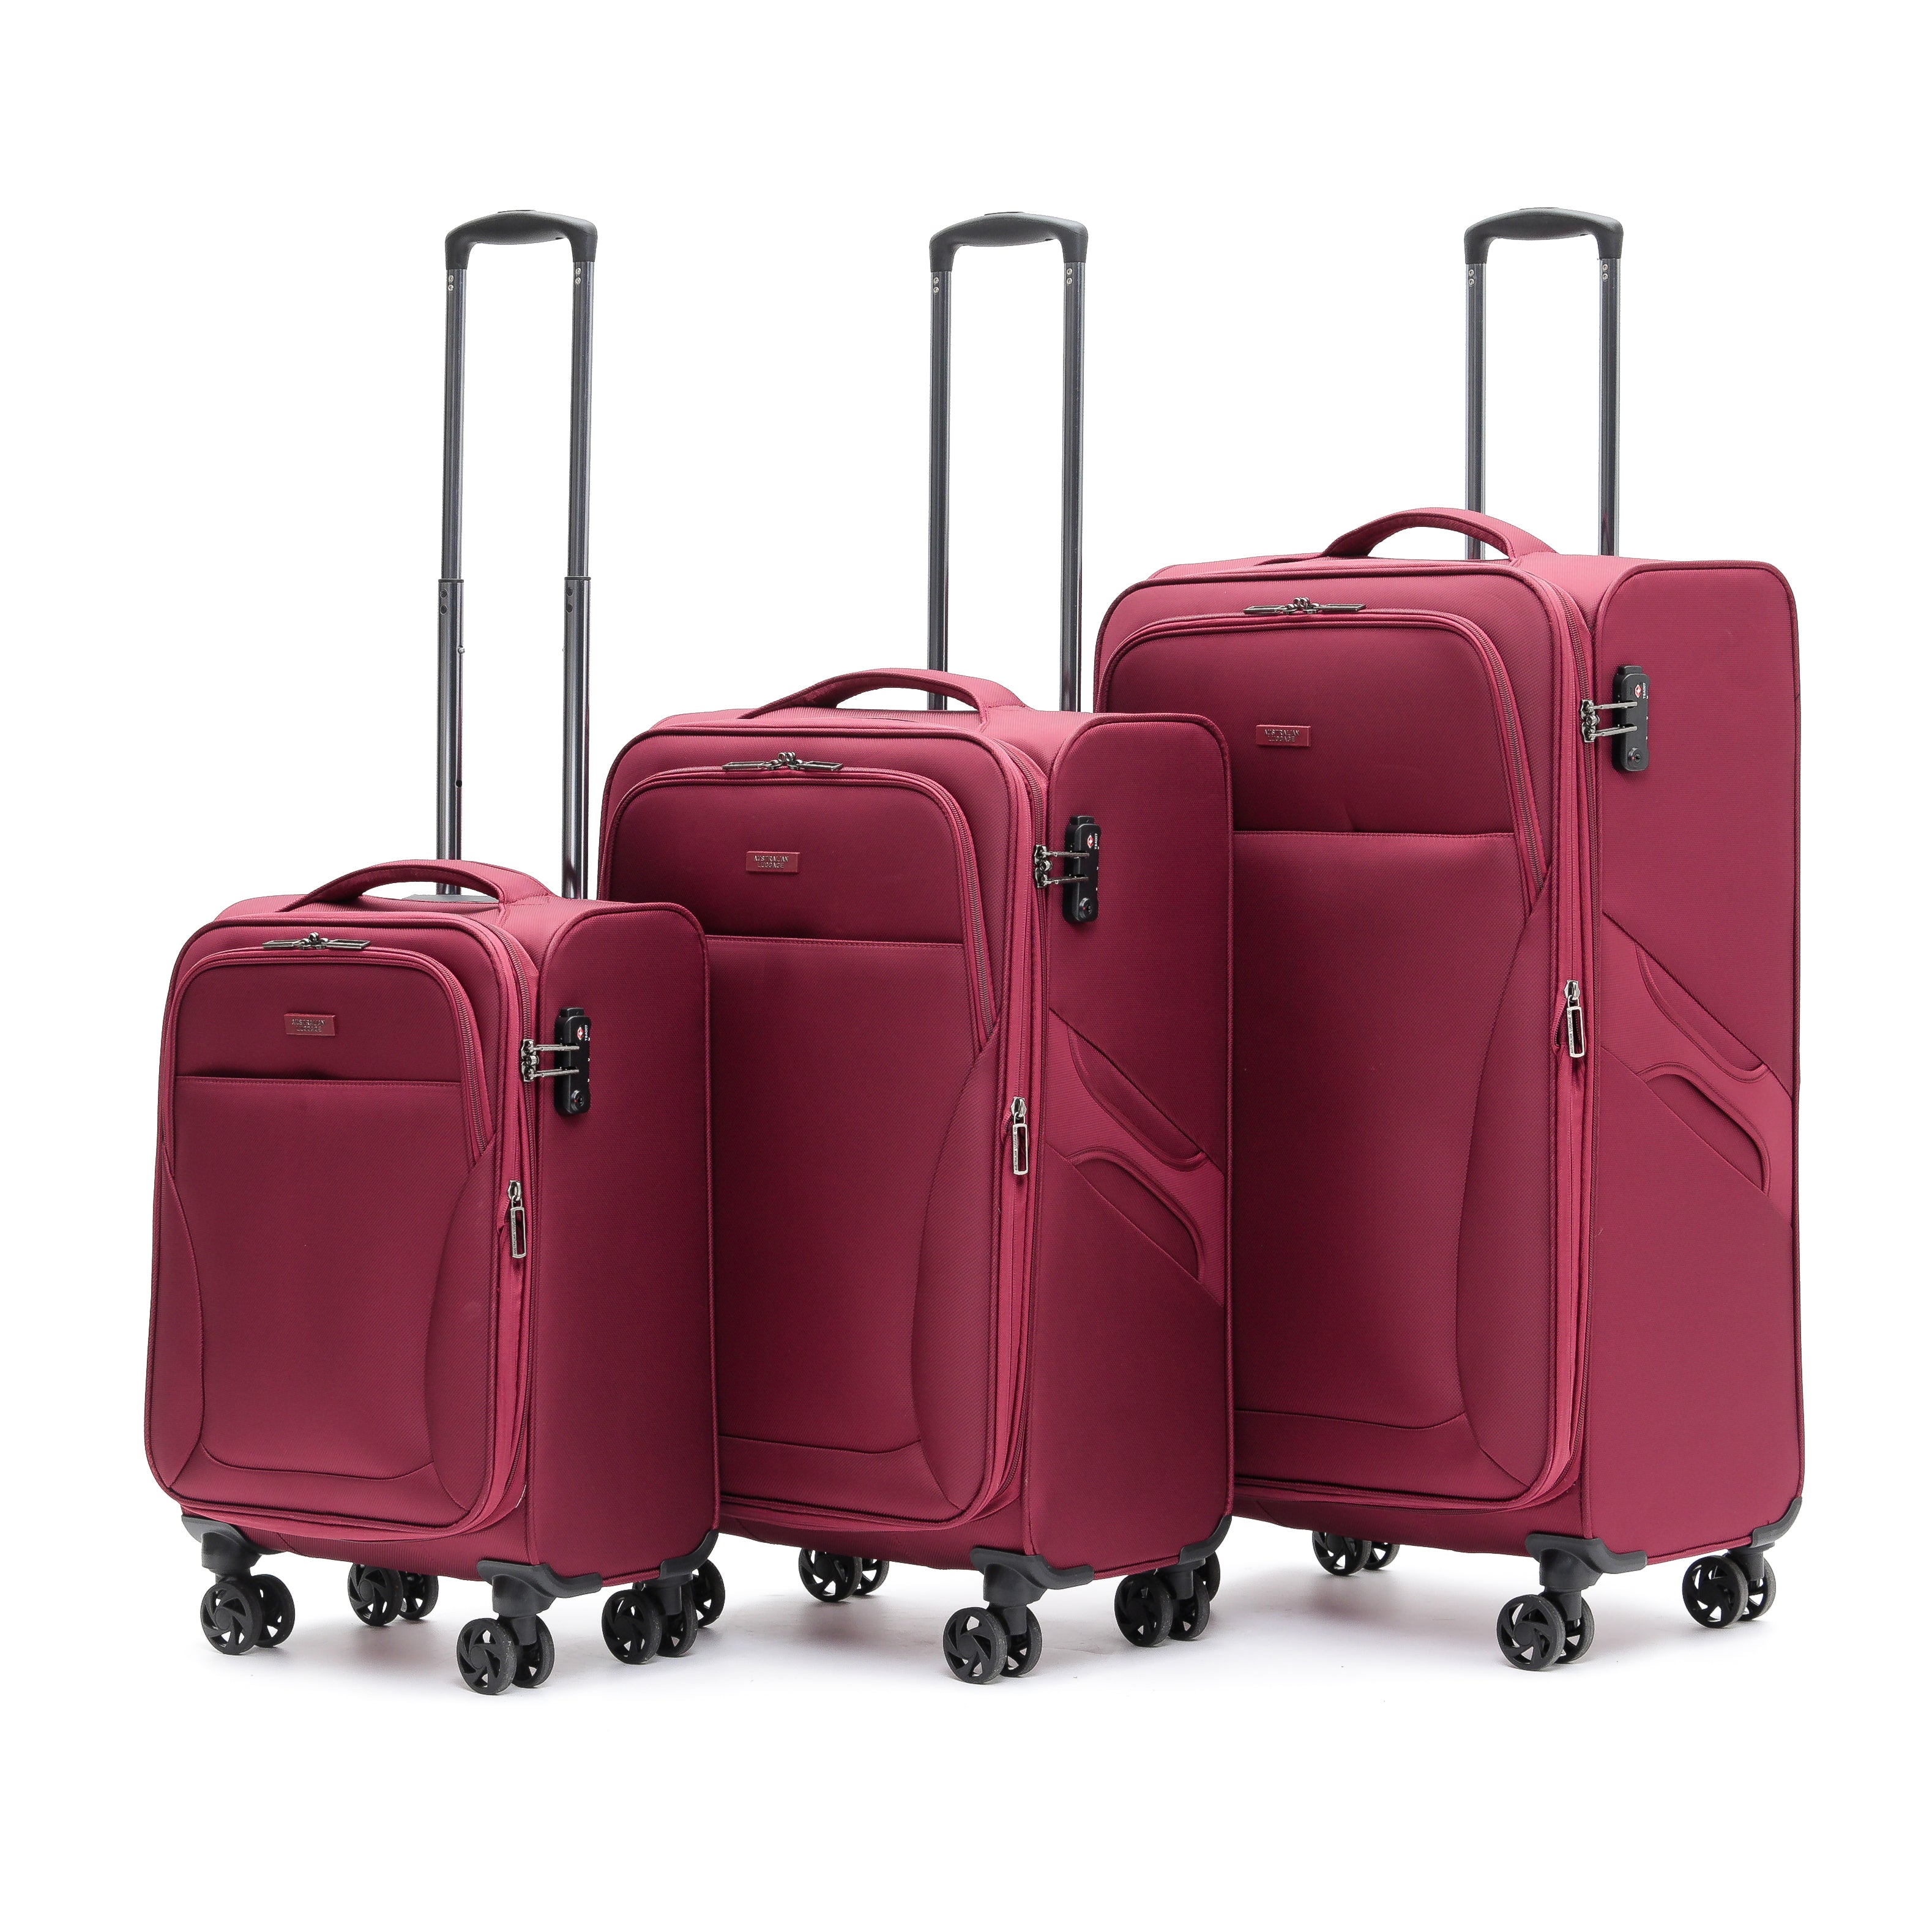 Aus Luggage - WINGS Set of 3 Suitcases - Wine